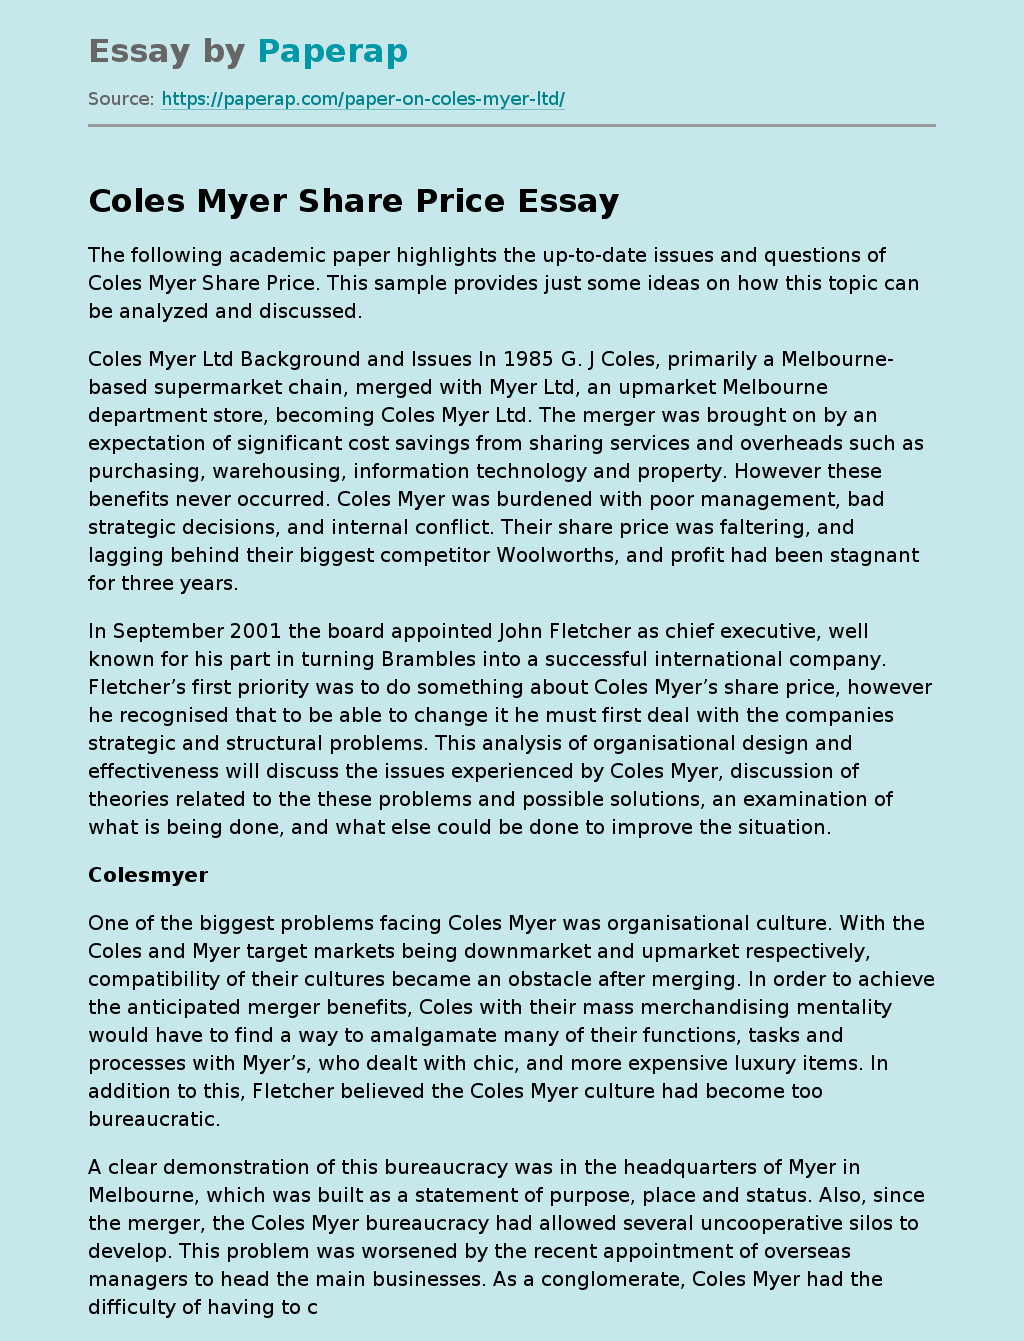 Coles Myer Share Price